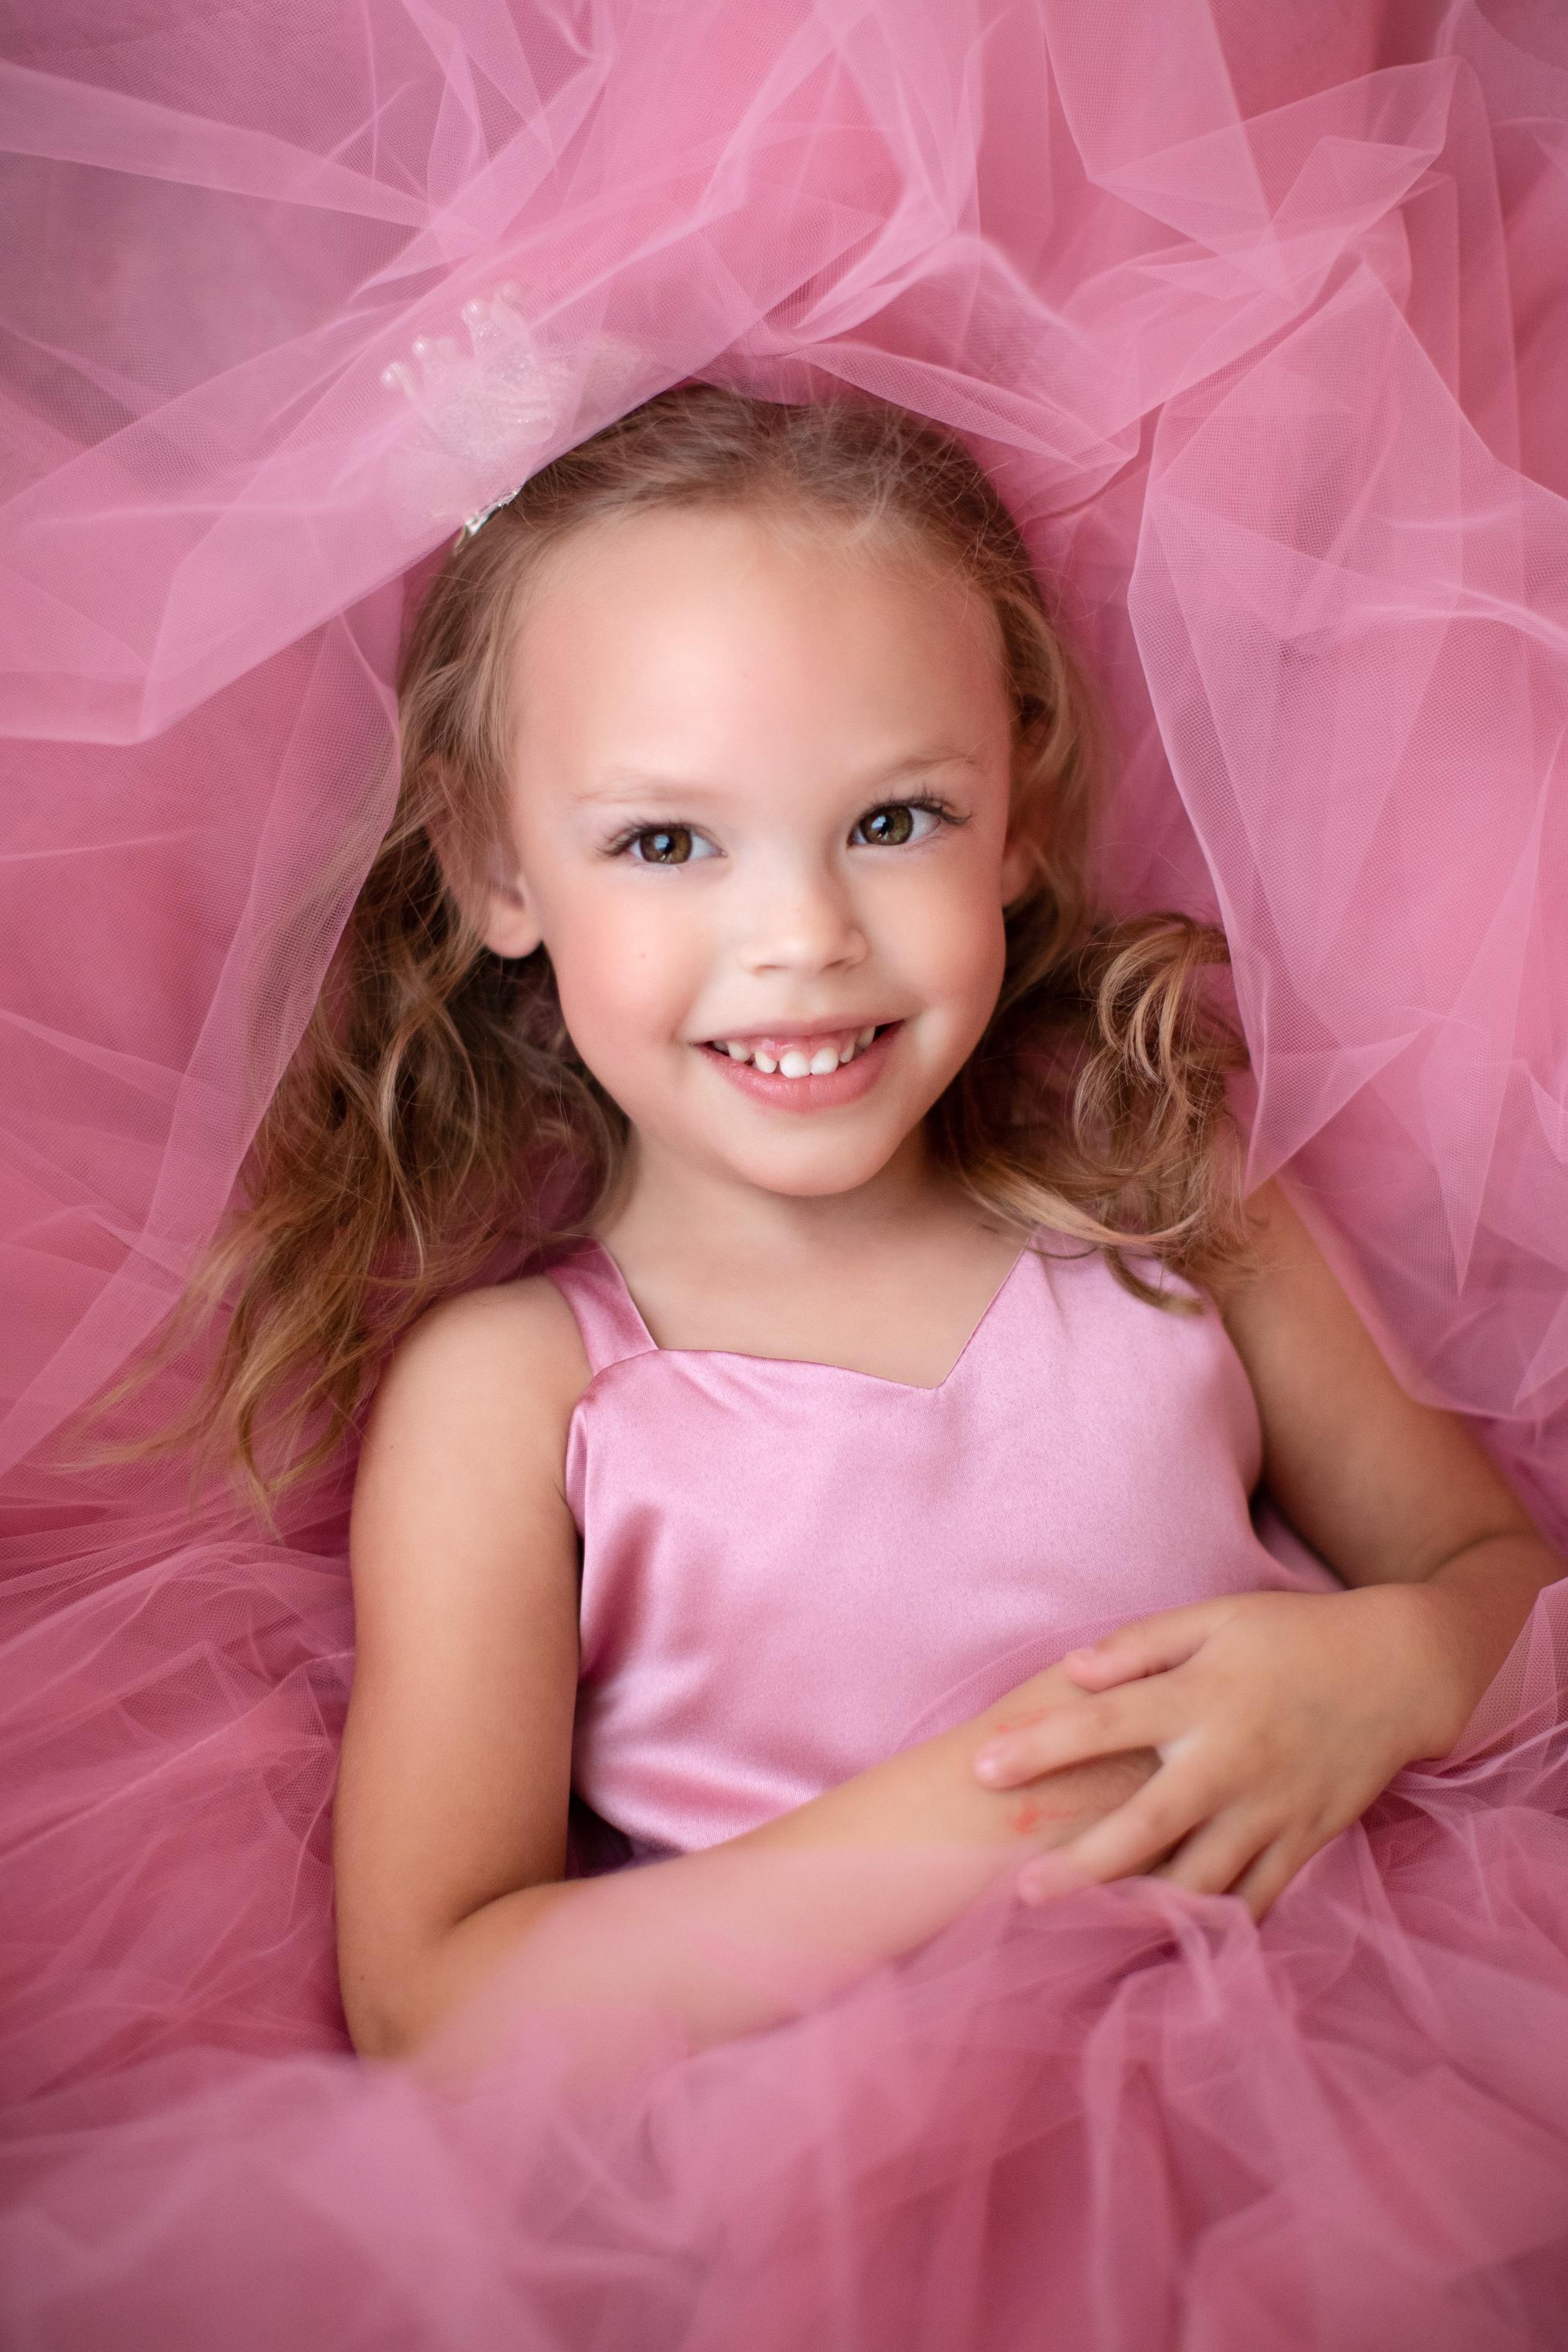 "Picture-perfect flower girl attire, adding a touch of magic to the bride's special day."